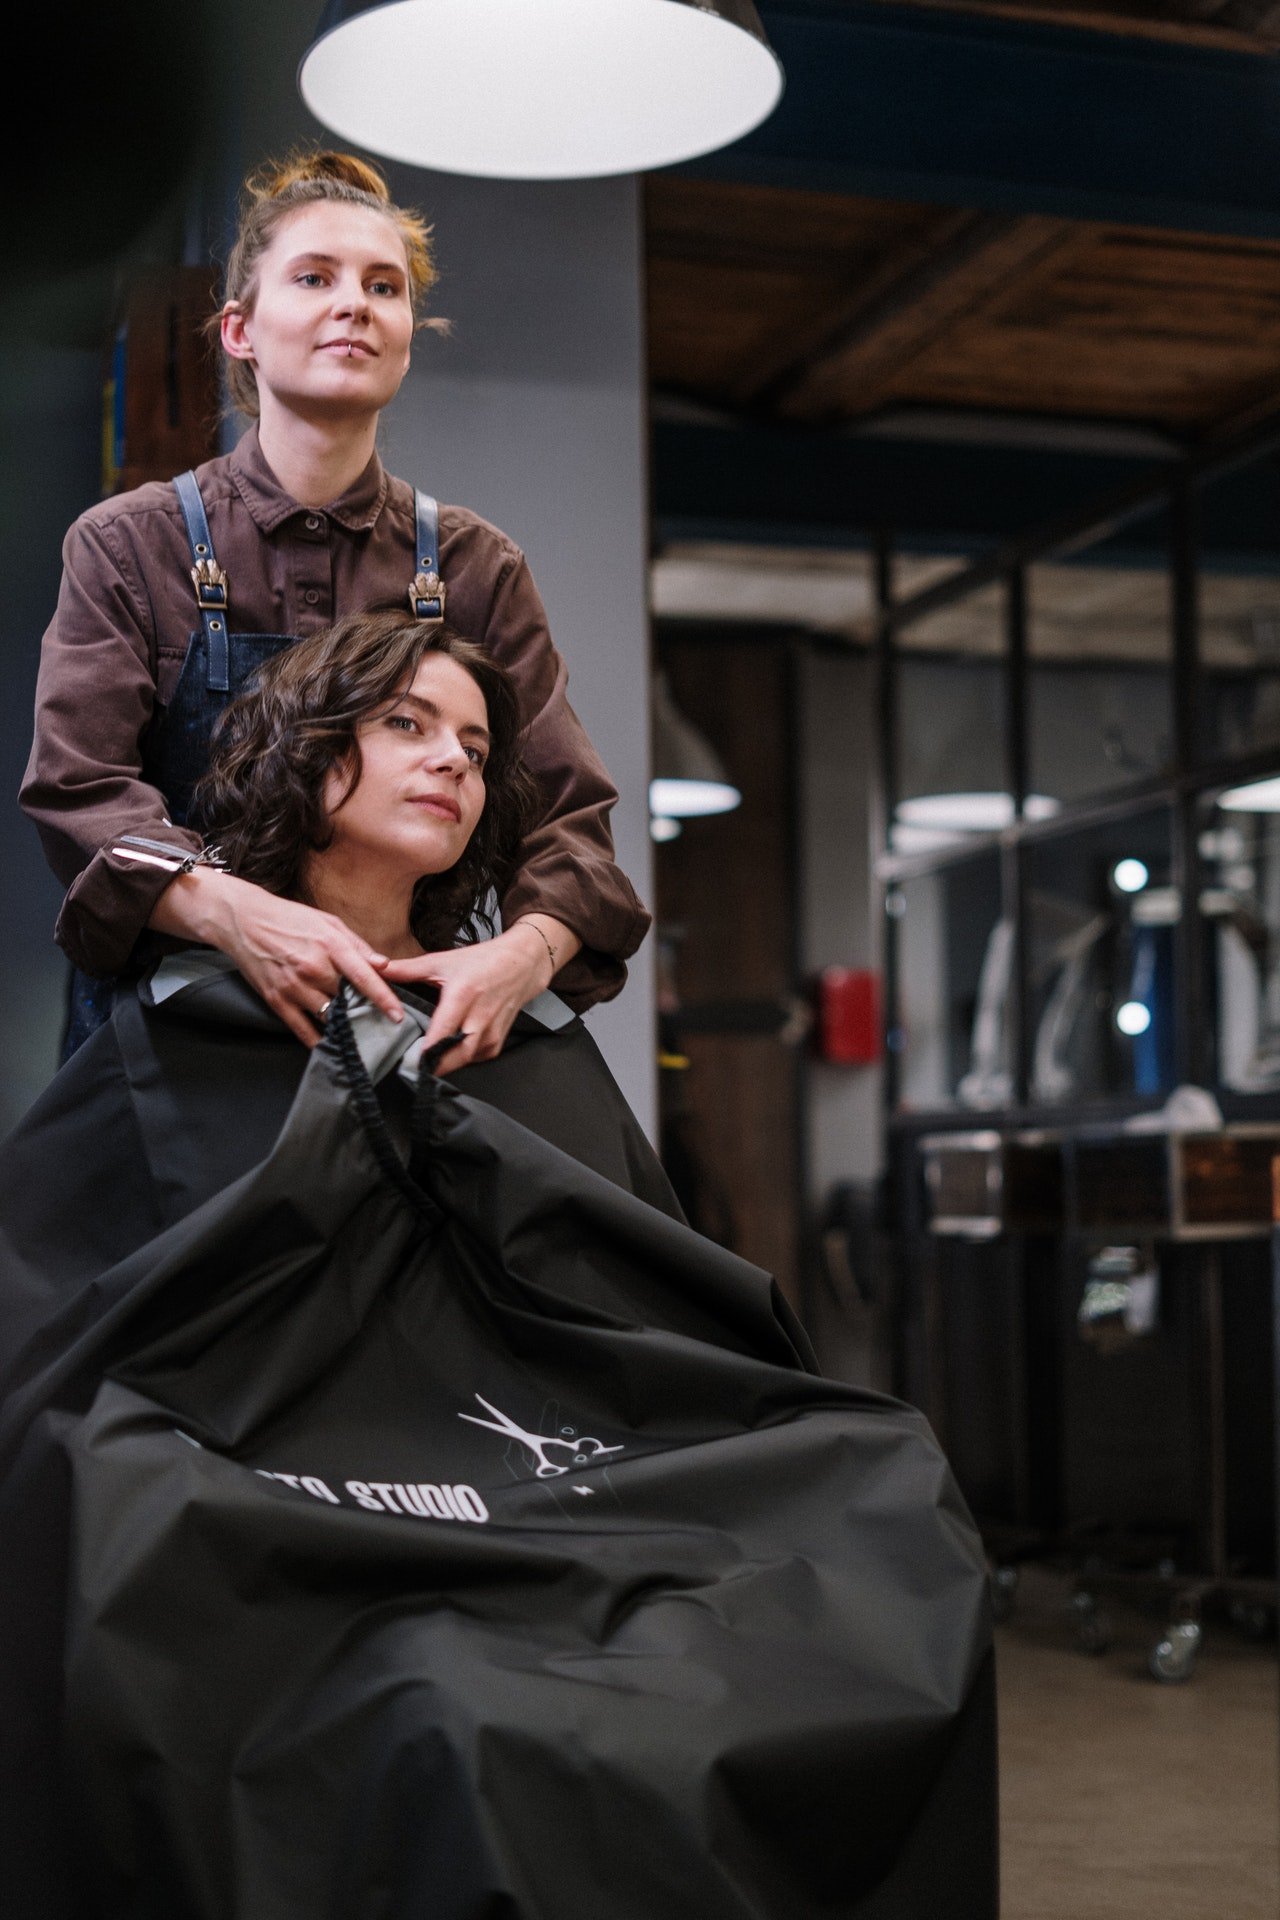 Hairdresser working on woman's hair | Photo: Pexels